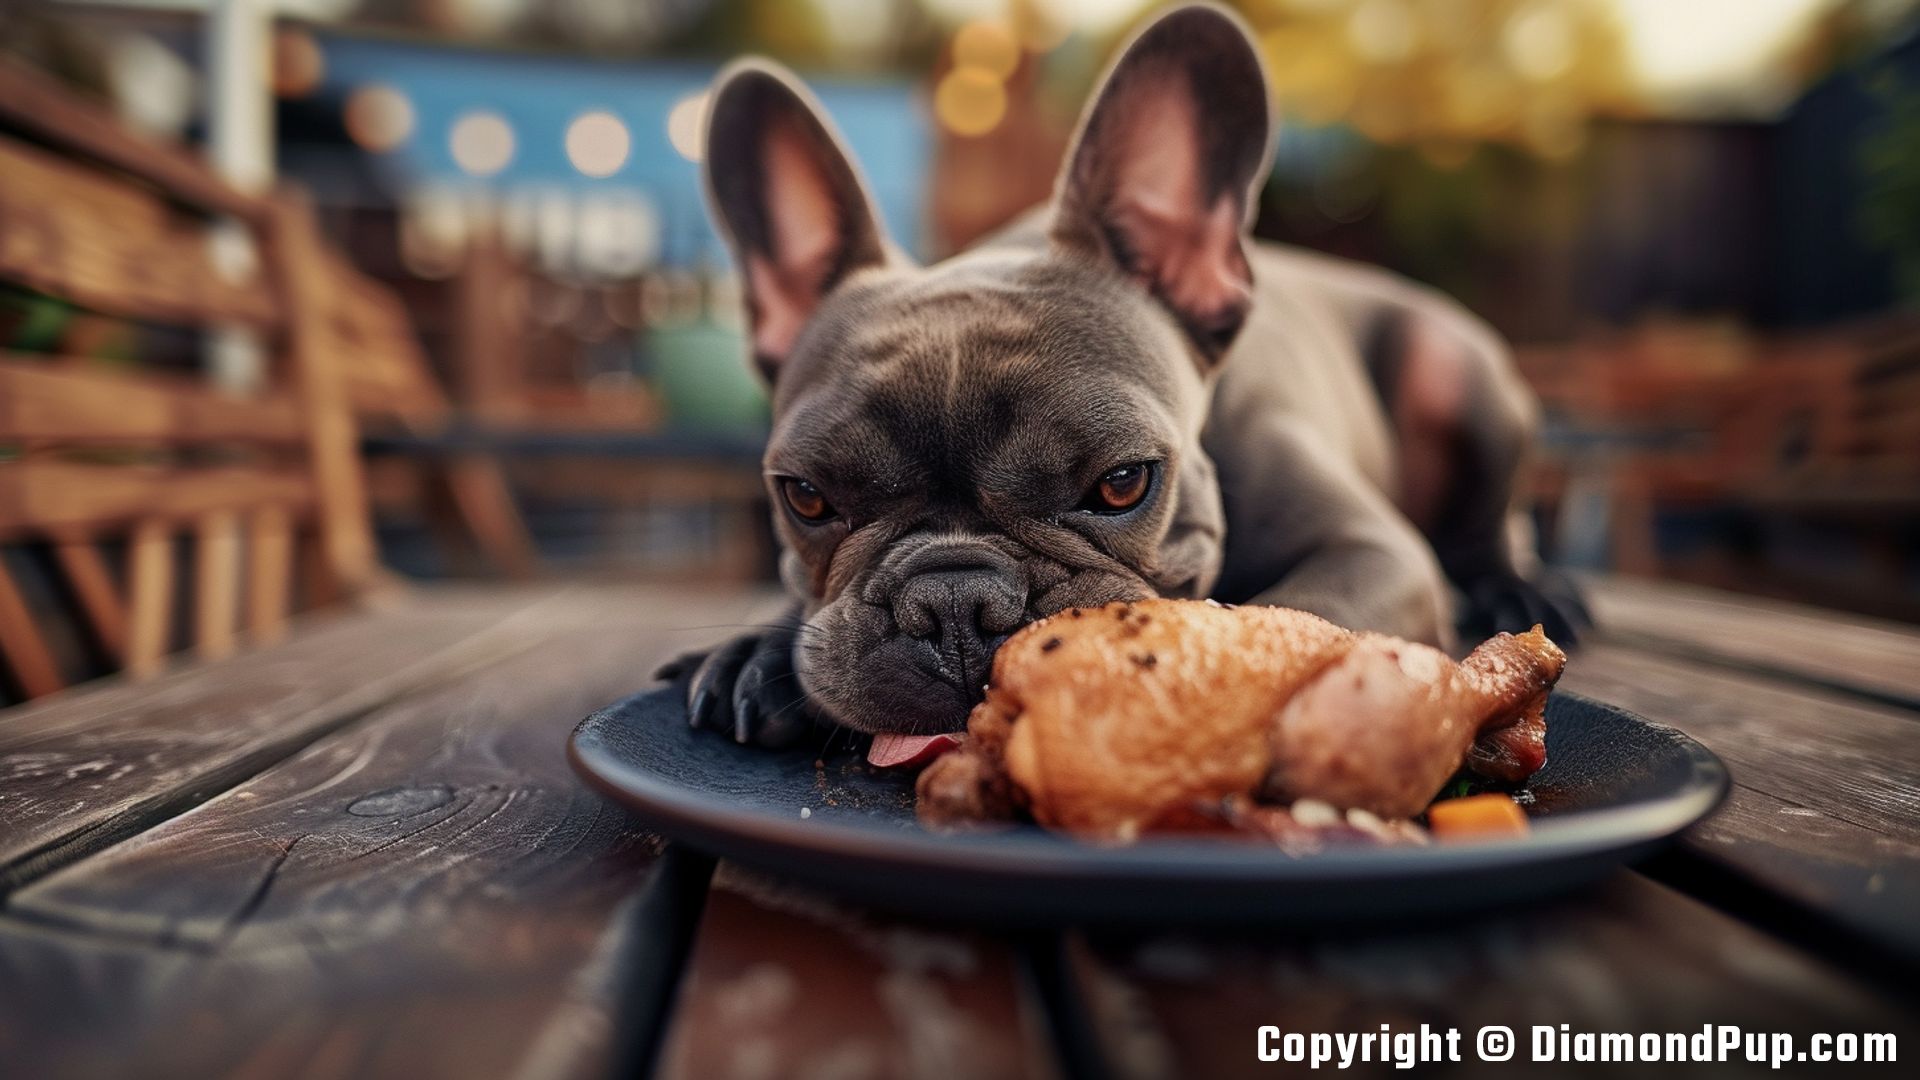 Photograph of a Playful French Bulldog Eating Chicken